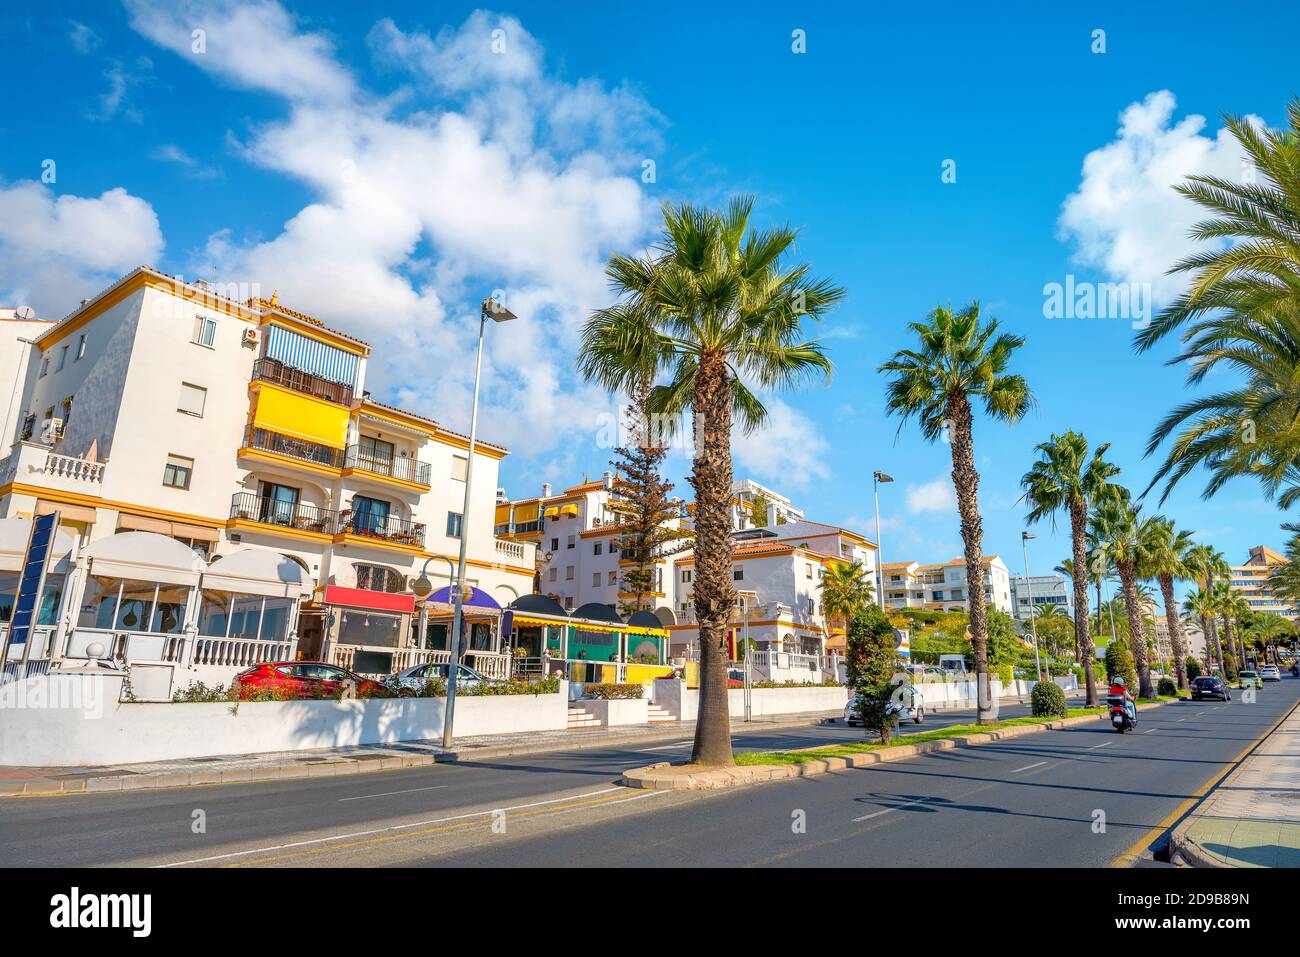 Cityscape of coastal residential district along seaside in resort town Benalmadena. Malaga province, Andalusia, Spain Stock Photo